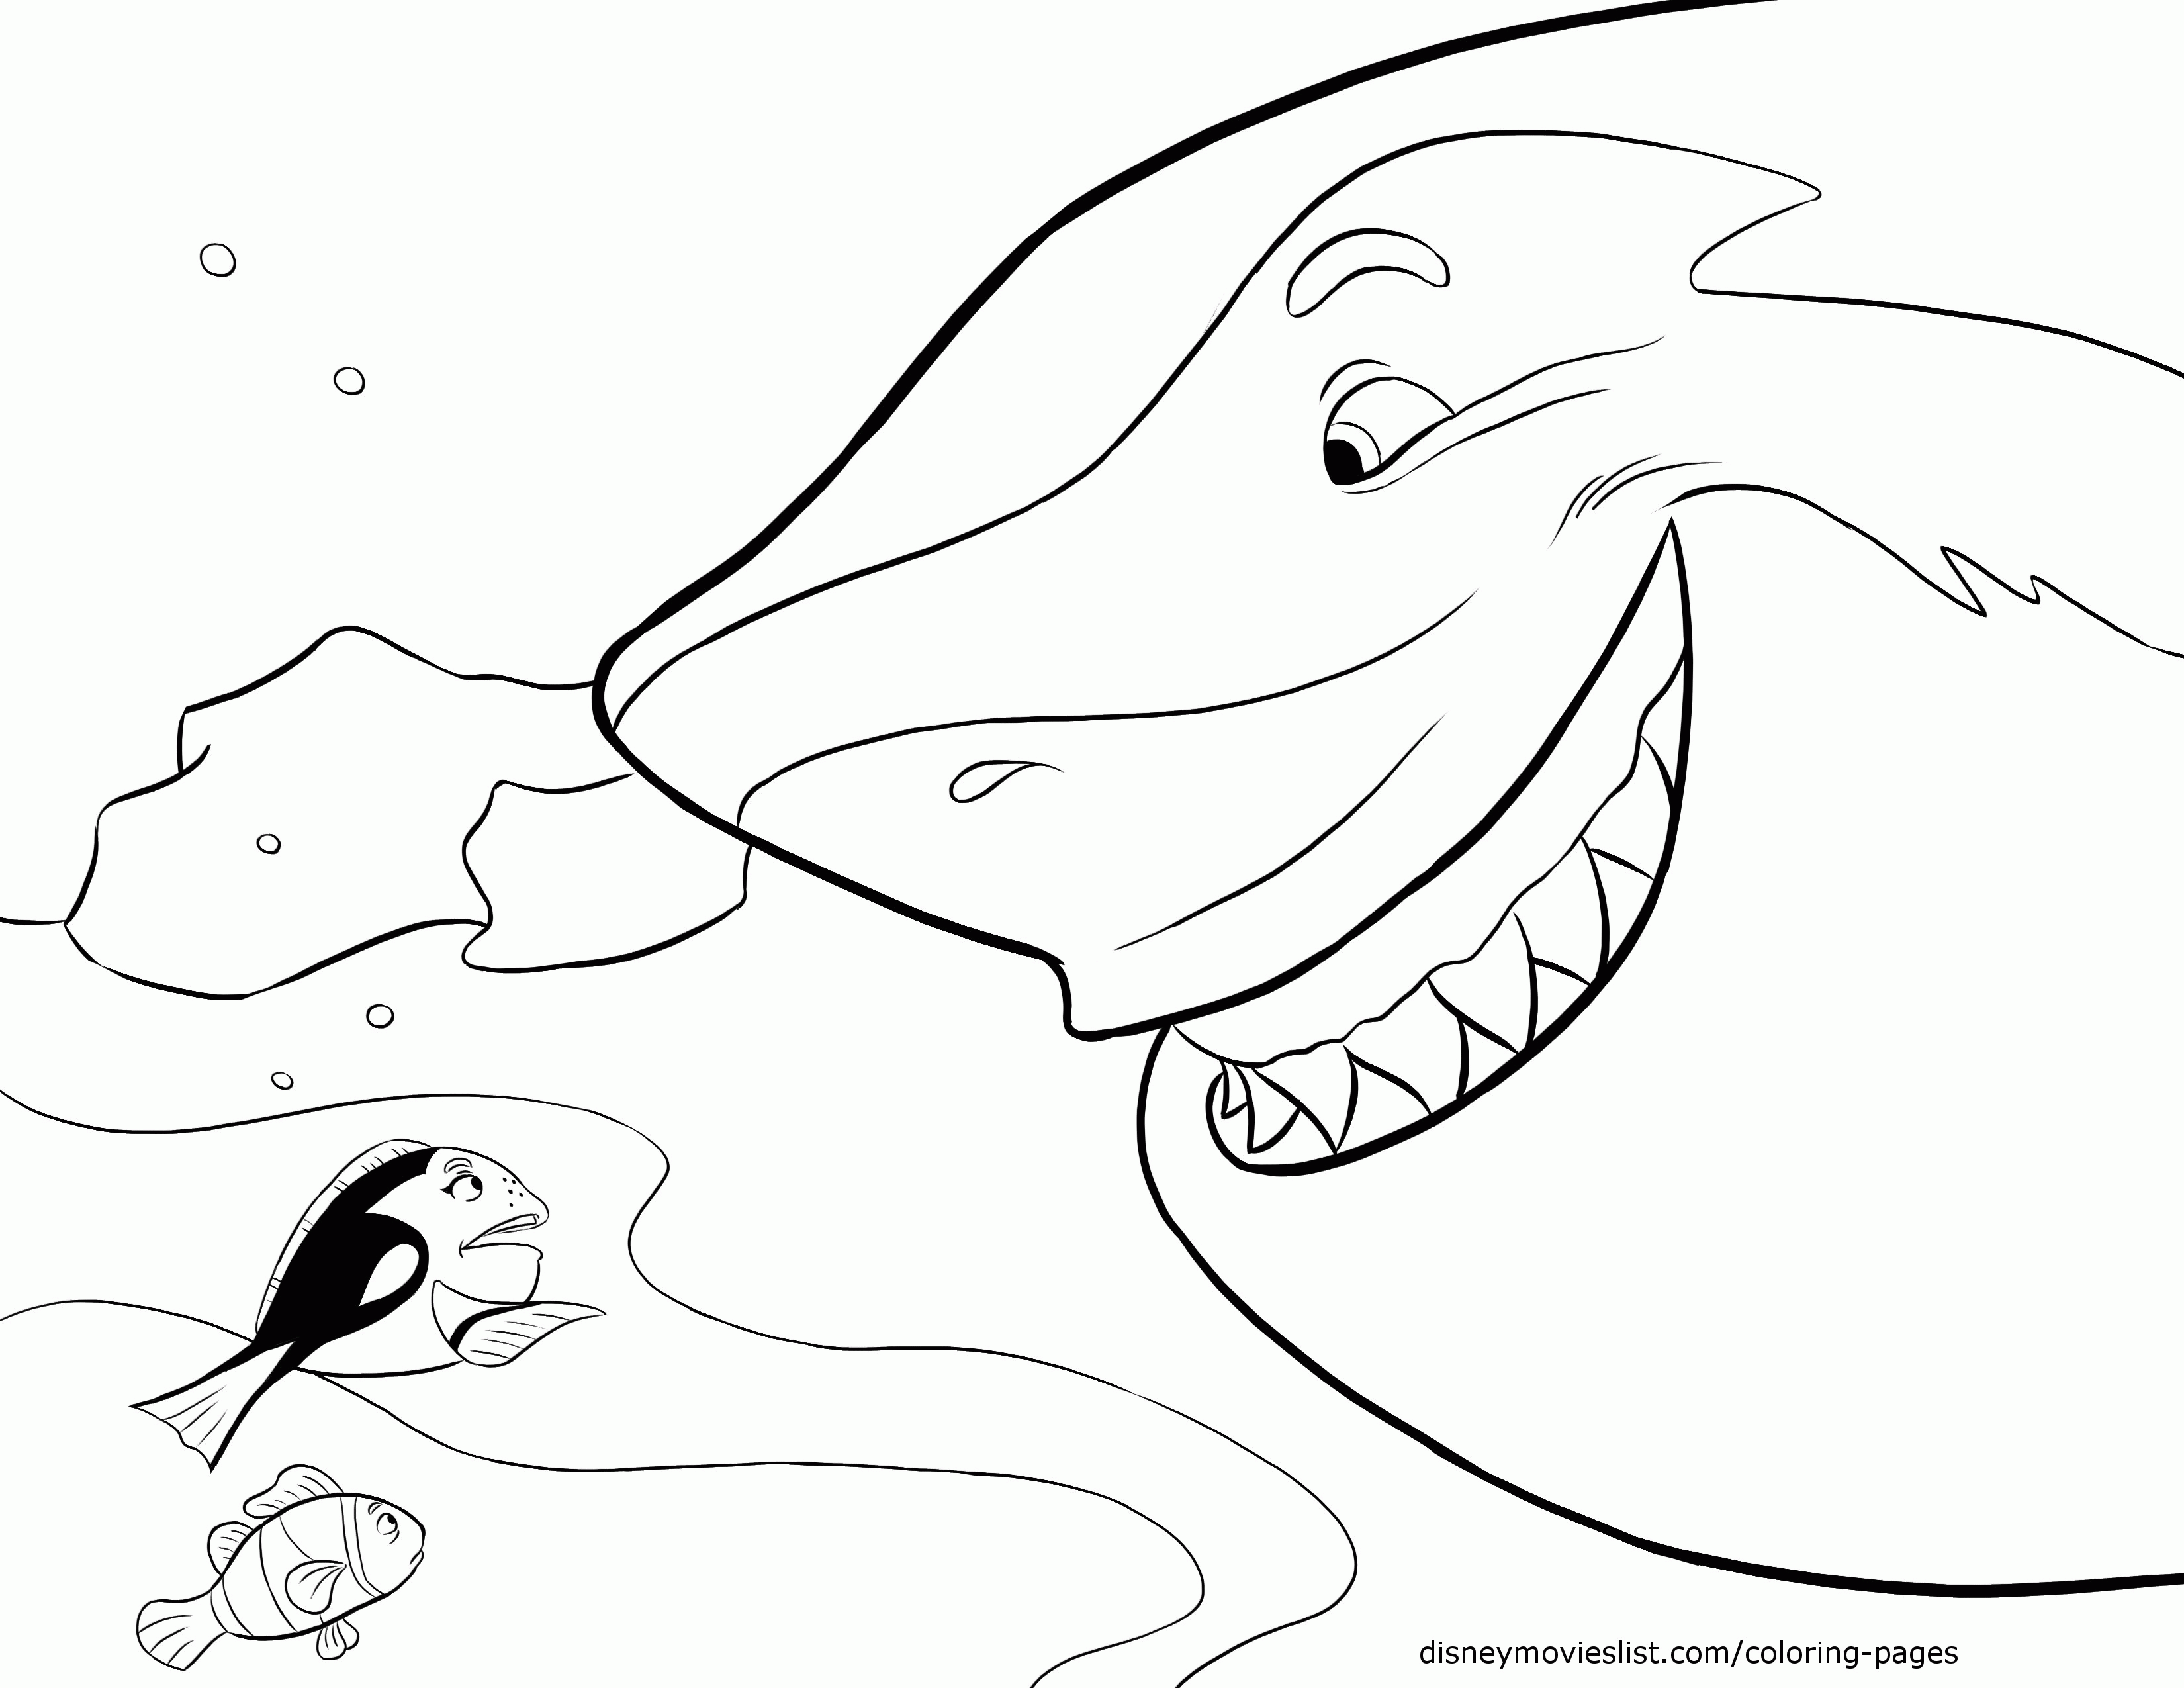 Marlin & Dory Coloring Page, Finding Nemo Printable Color Page